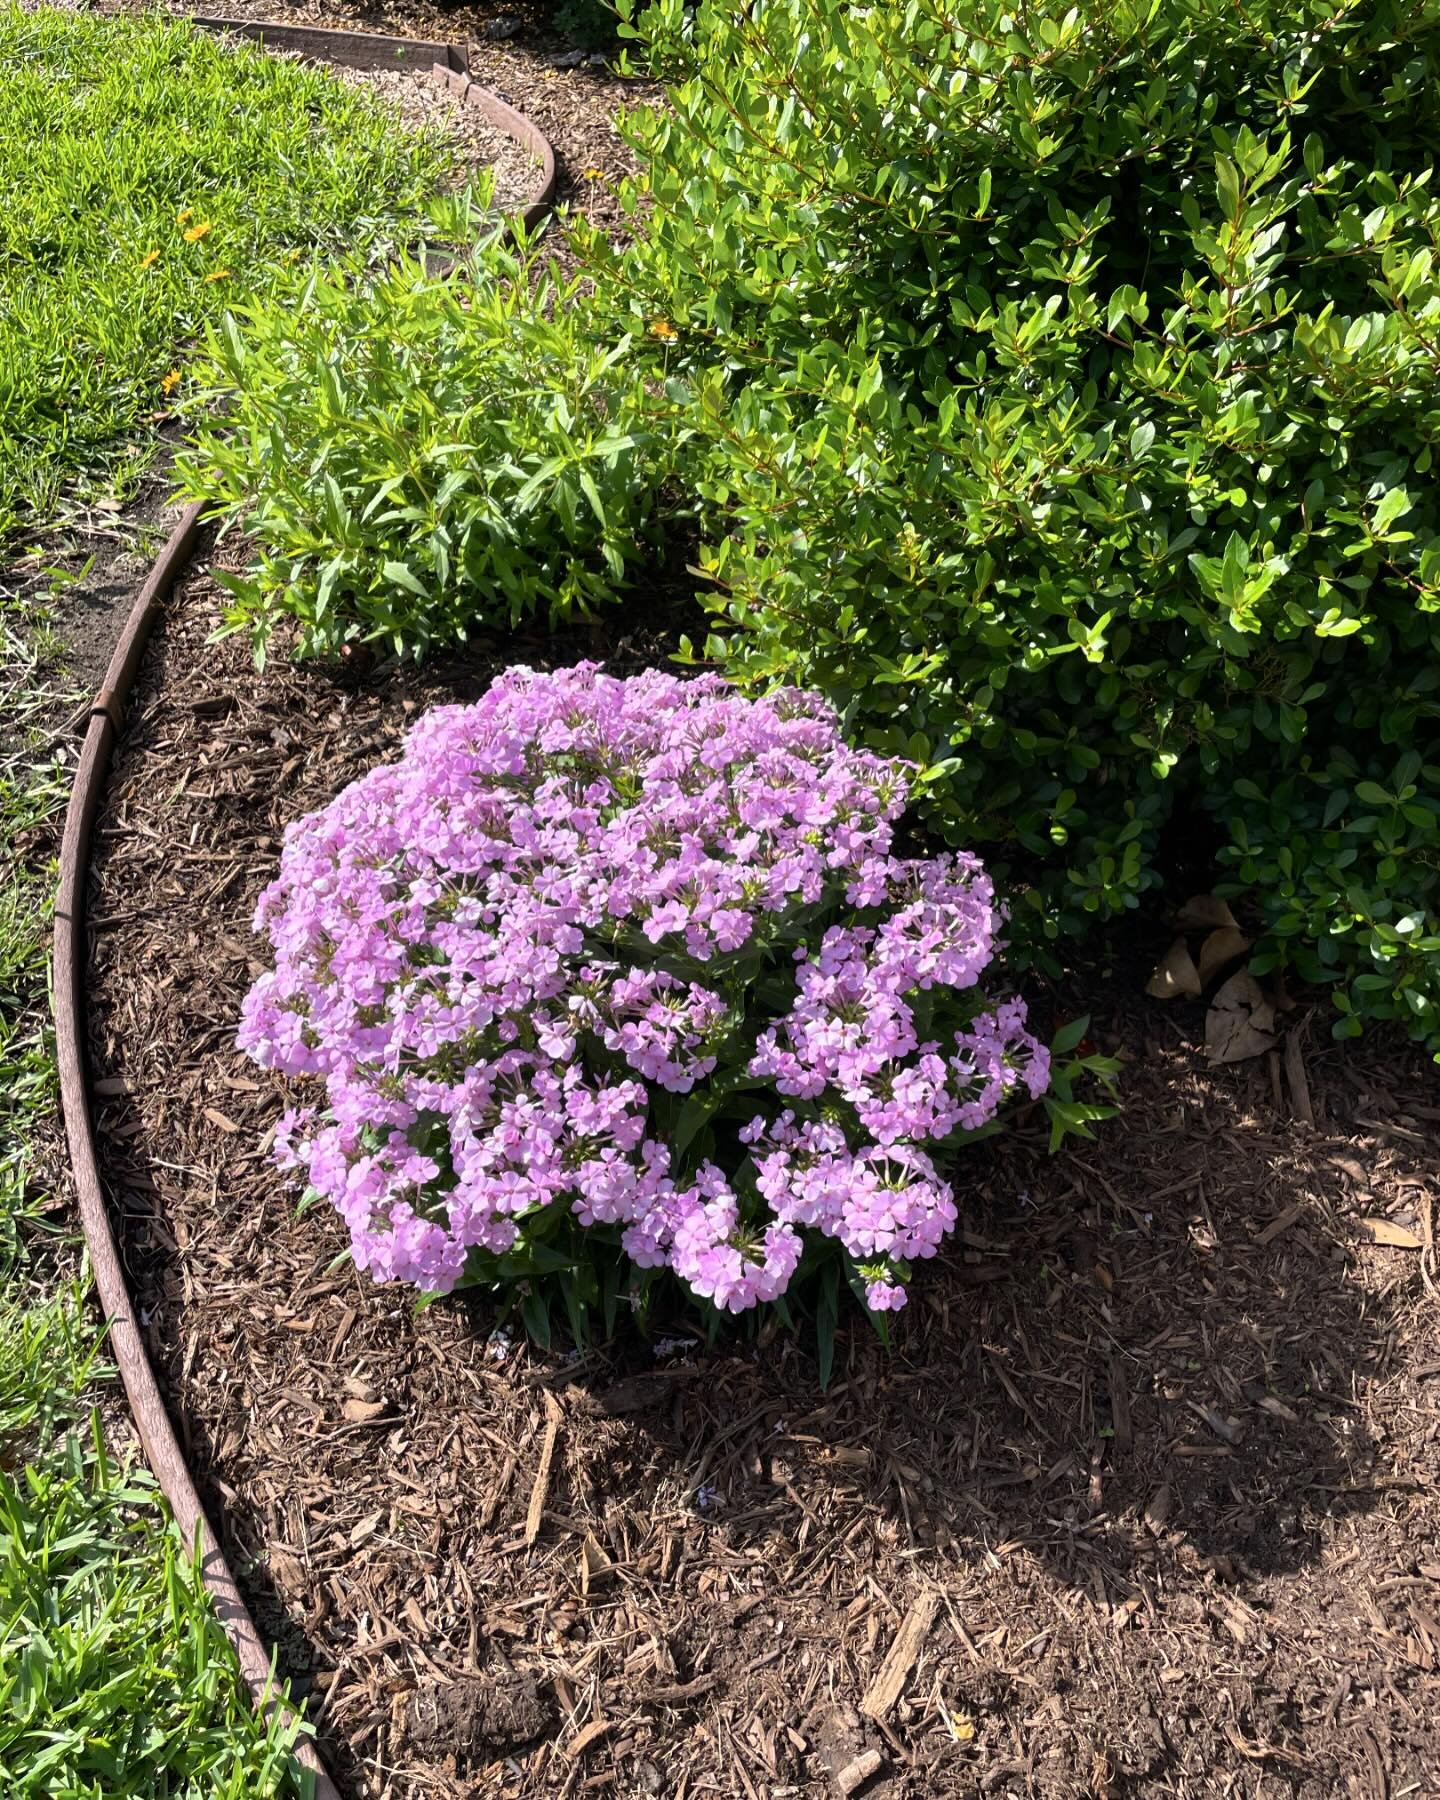 Great color on this phlox